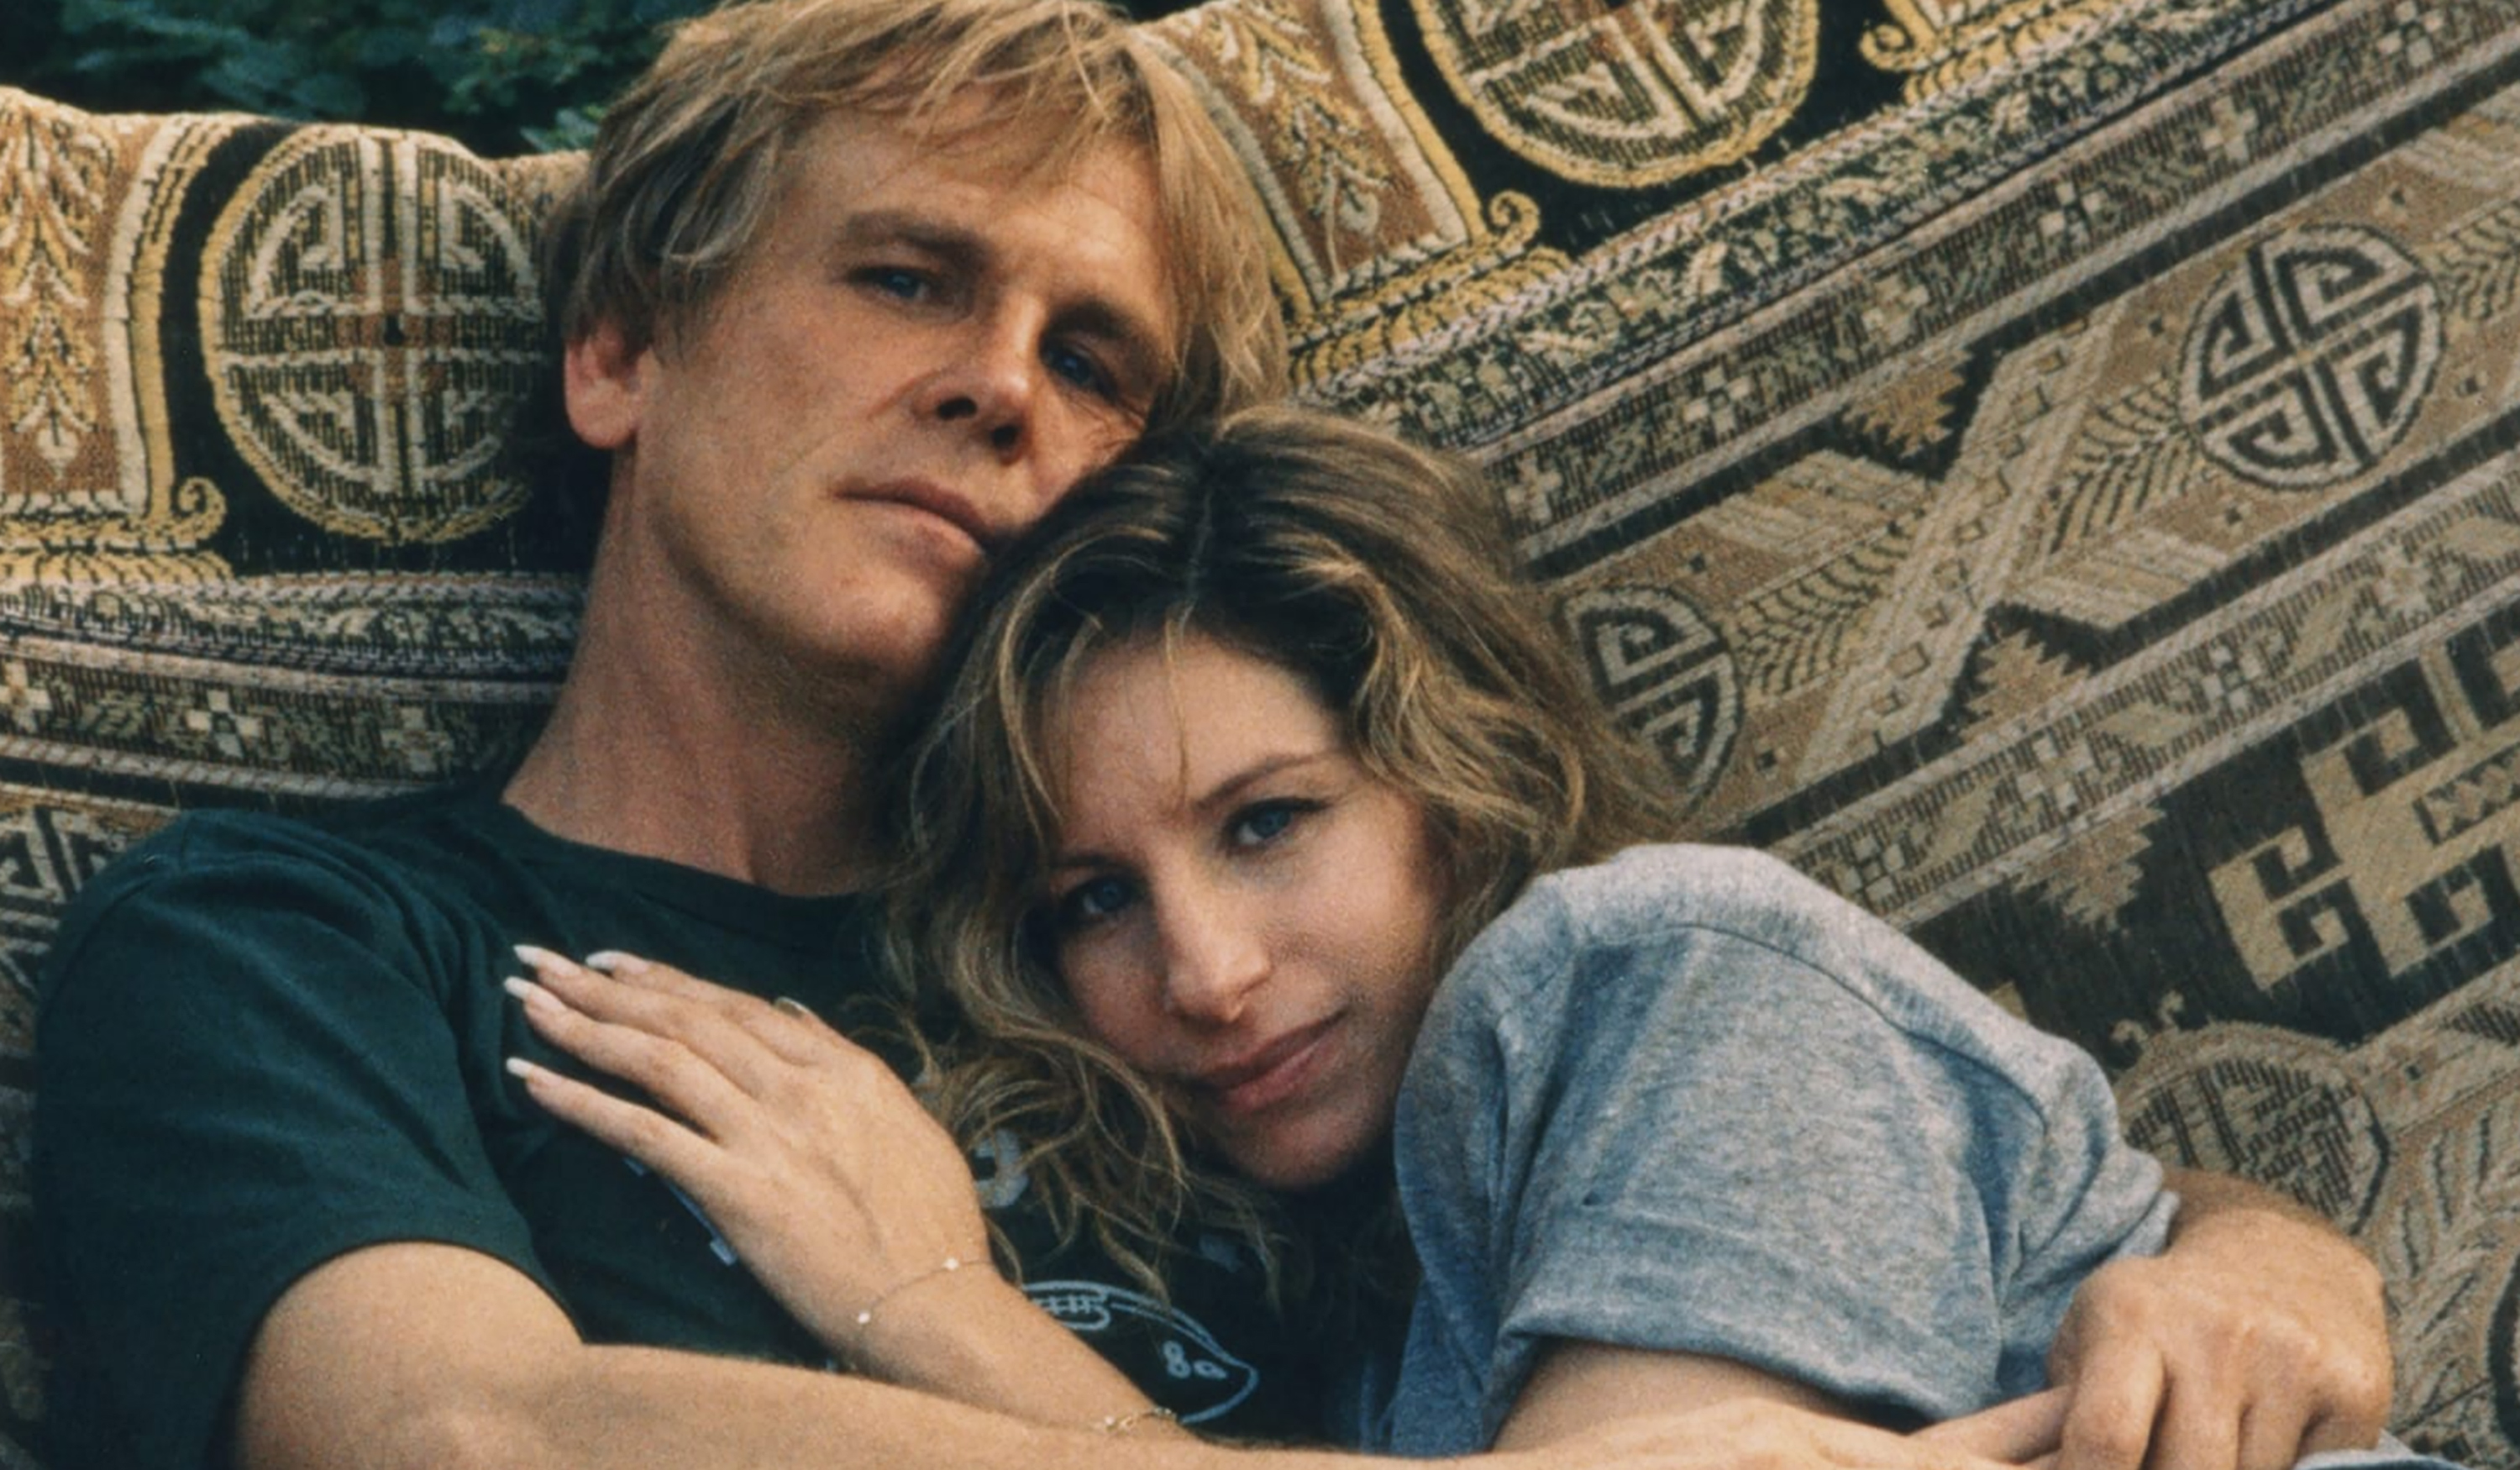 Nick Nolte and Barbra Streisand in “The Prince of Tides” (1991)